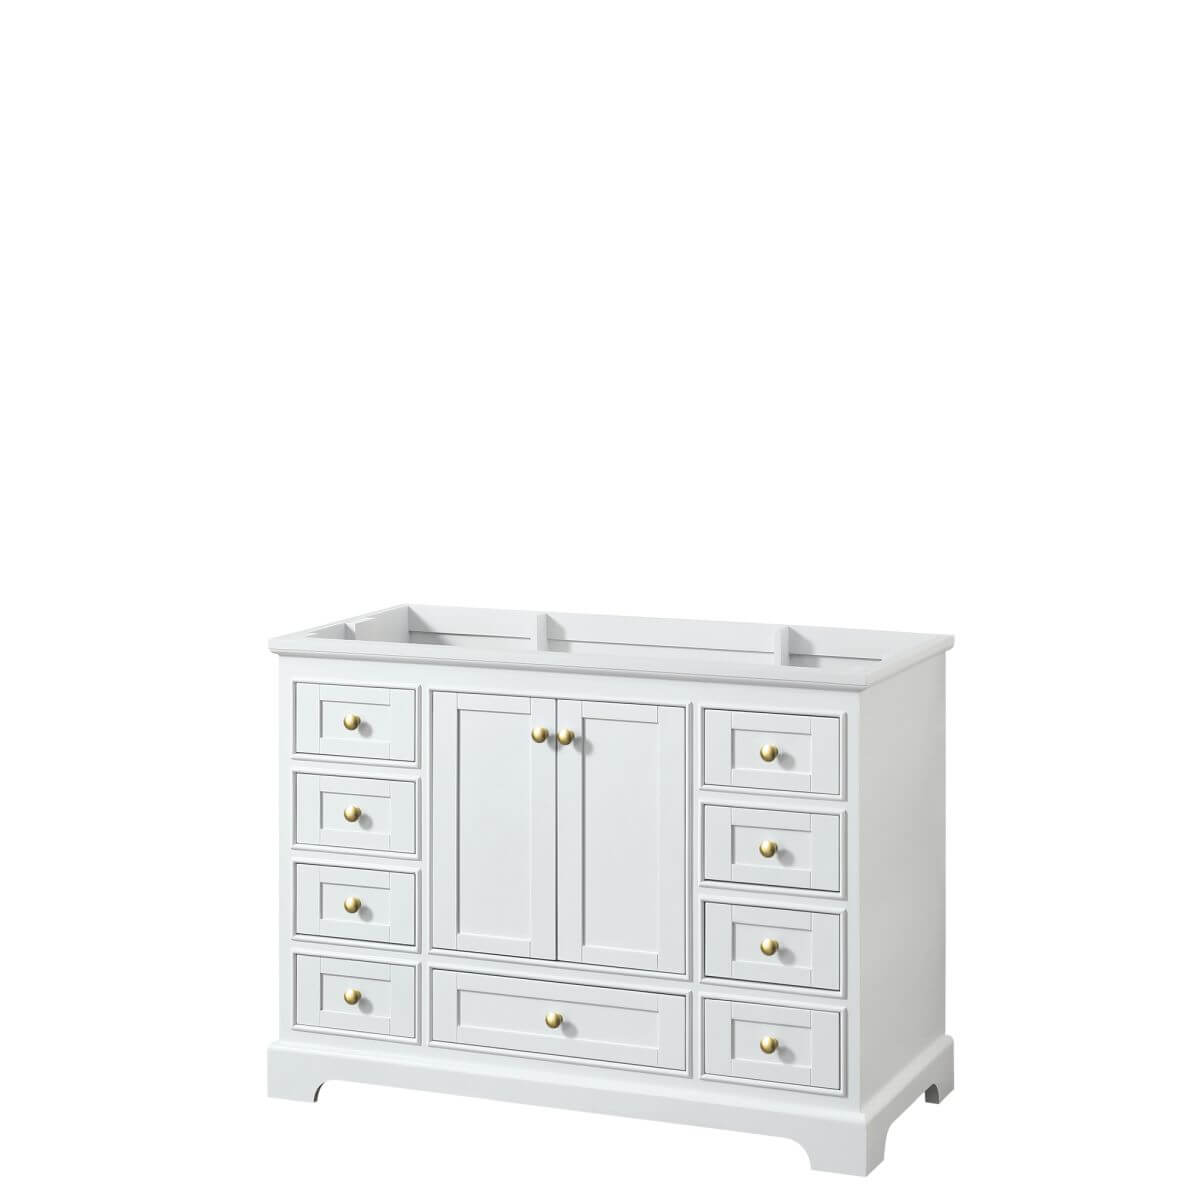 Wyndham Collection Deborah 48 inch Single Bathroom Vanity in White with Brushed Gold Trim, No Countertop, No Sink and No Mirror - WCS202048SWGCXSXXMXX